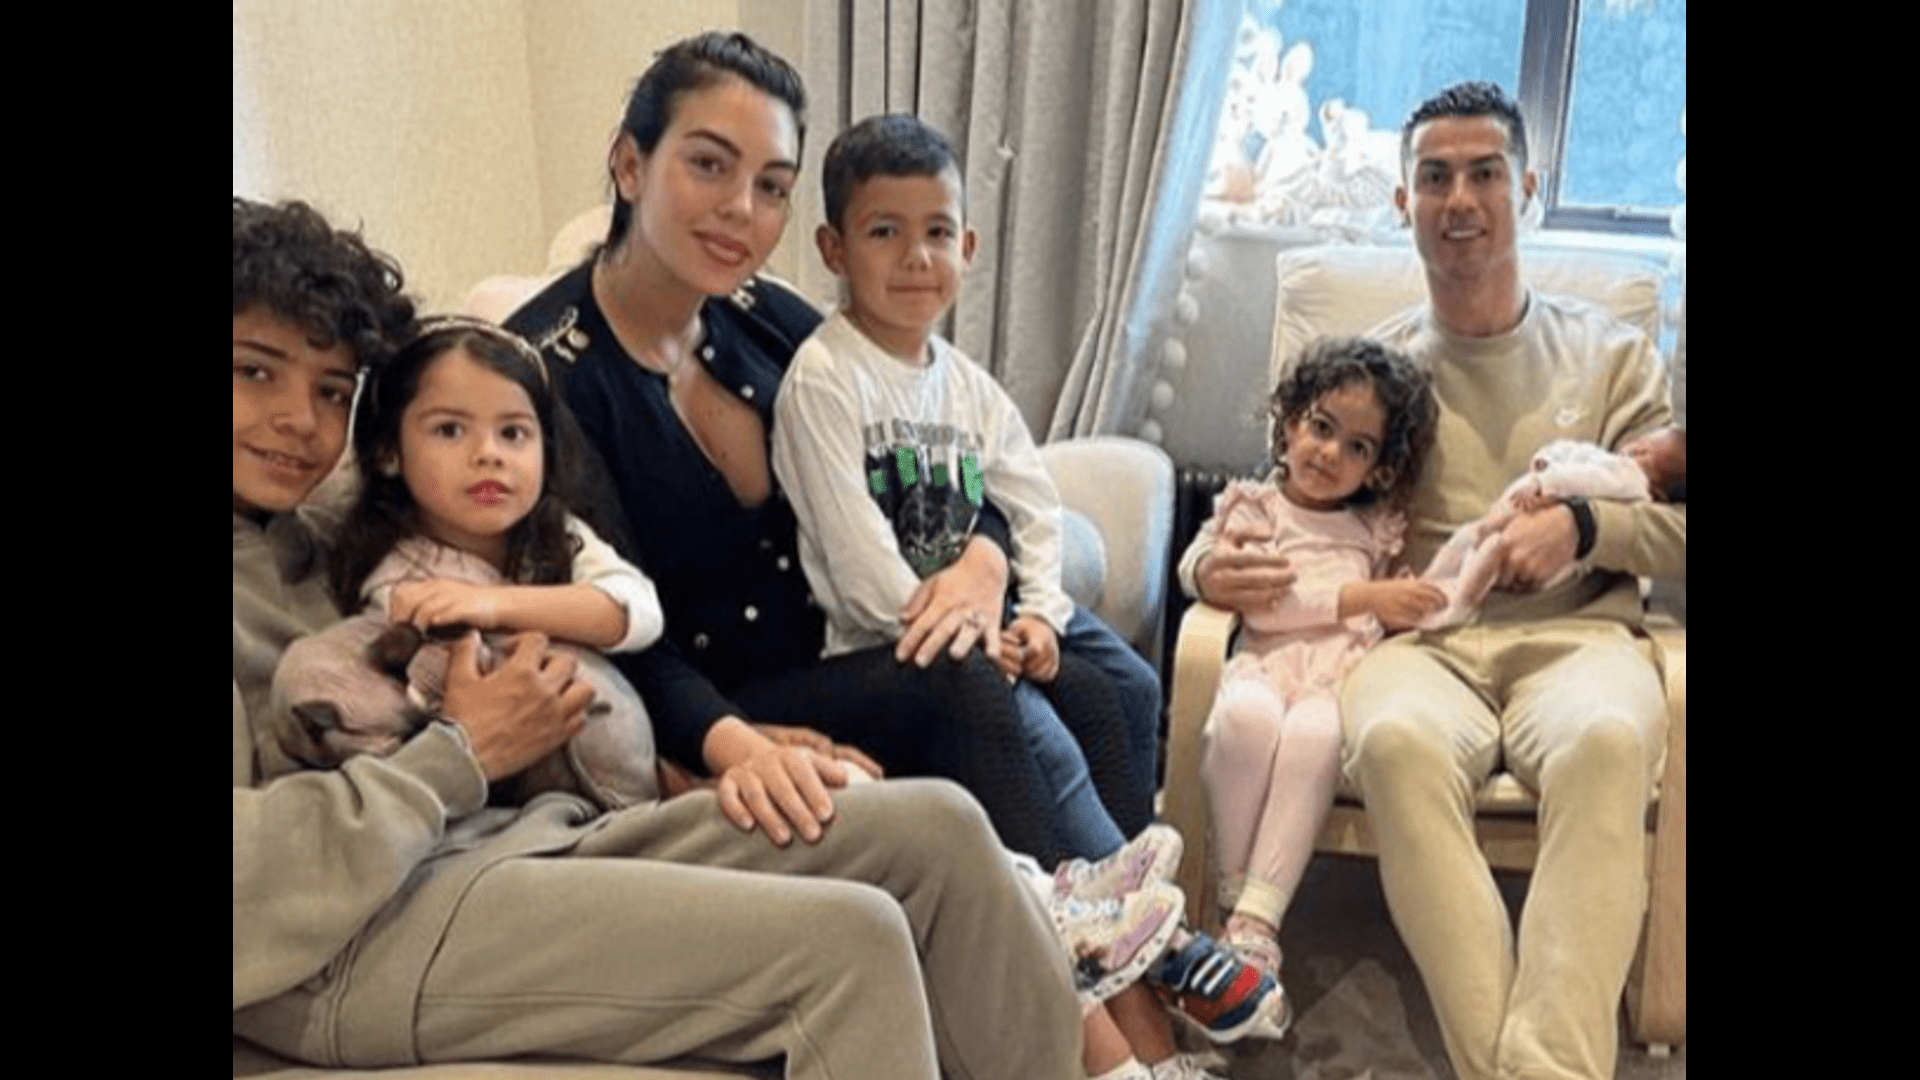 ”cristiano-ronaldo-shares-their-first-family-photo-with-newborn-daughter”